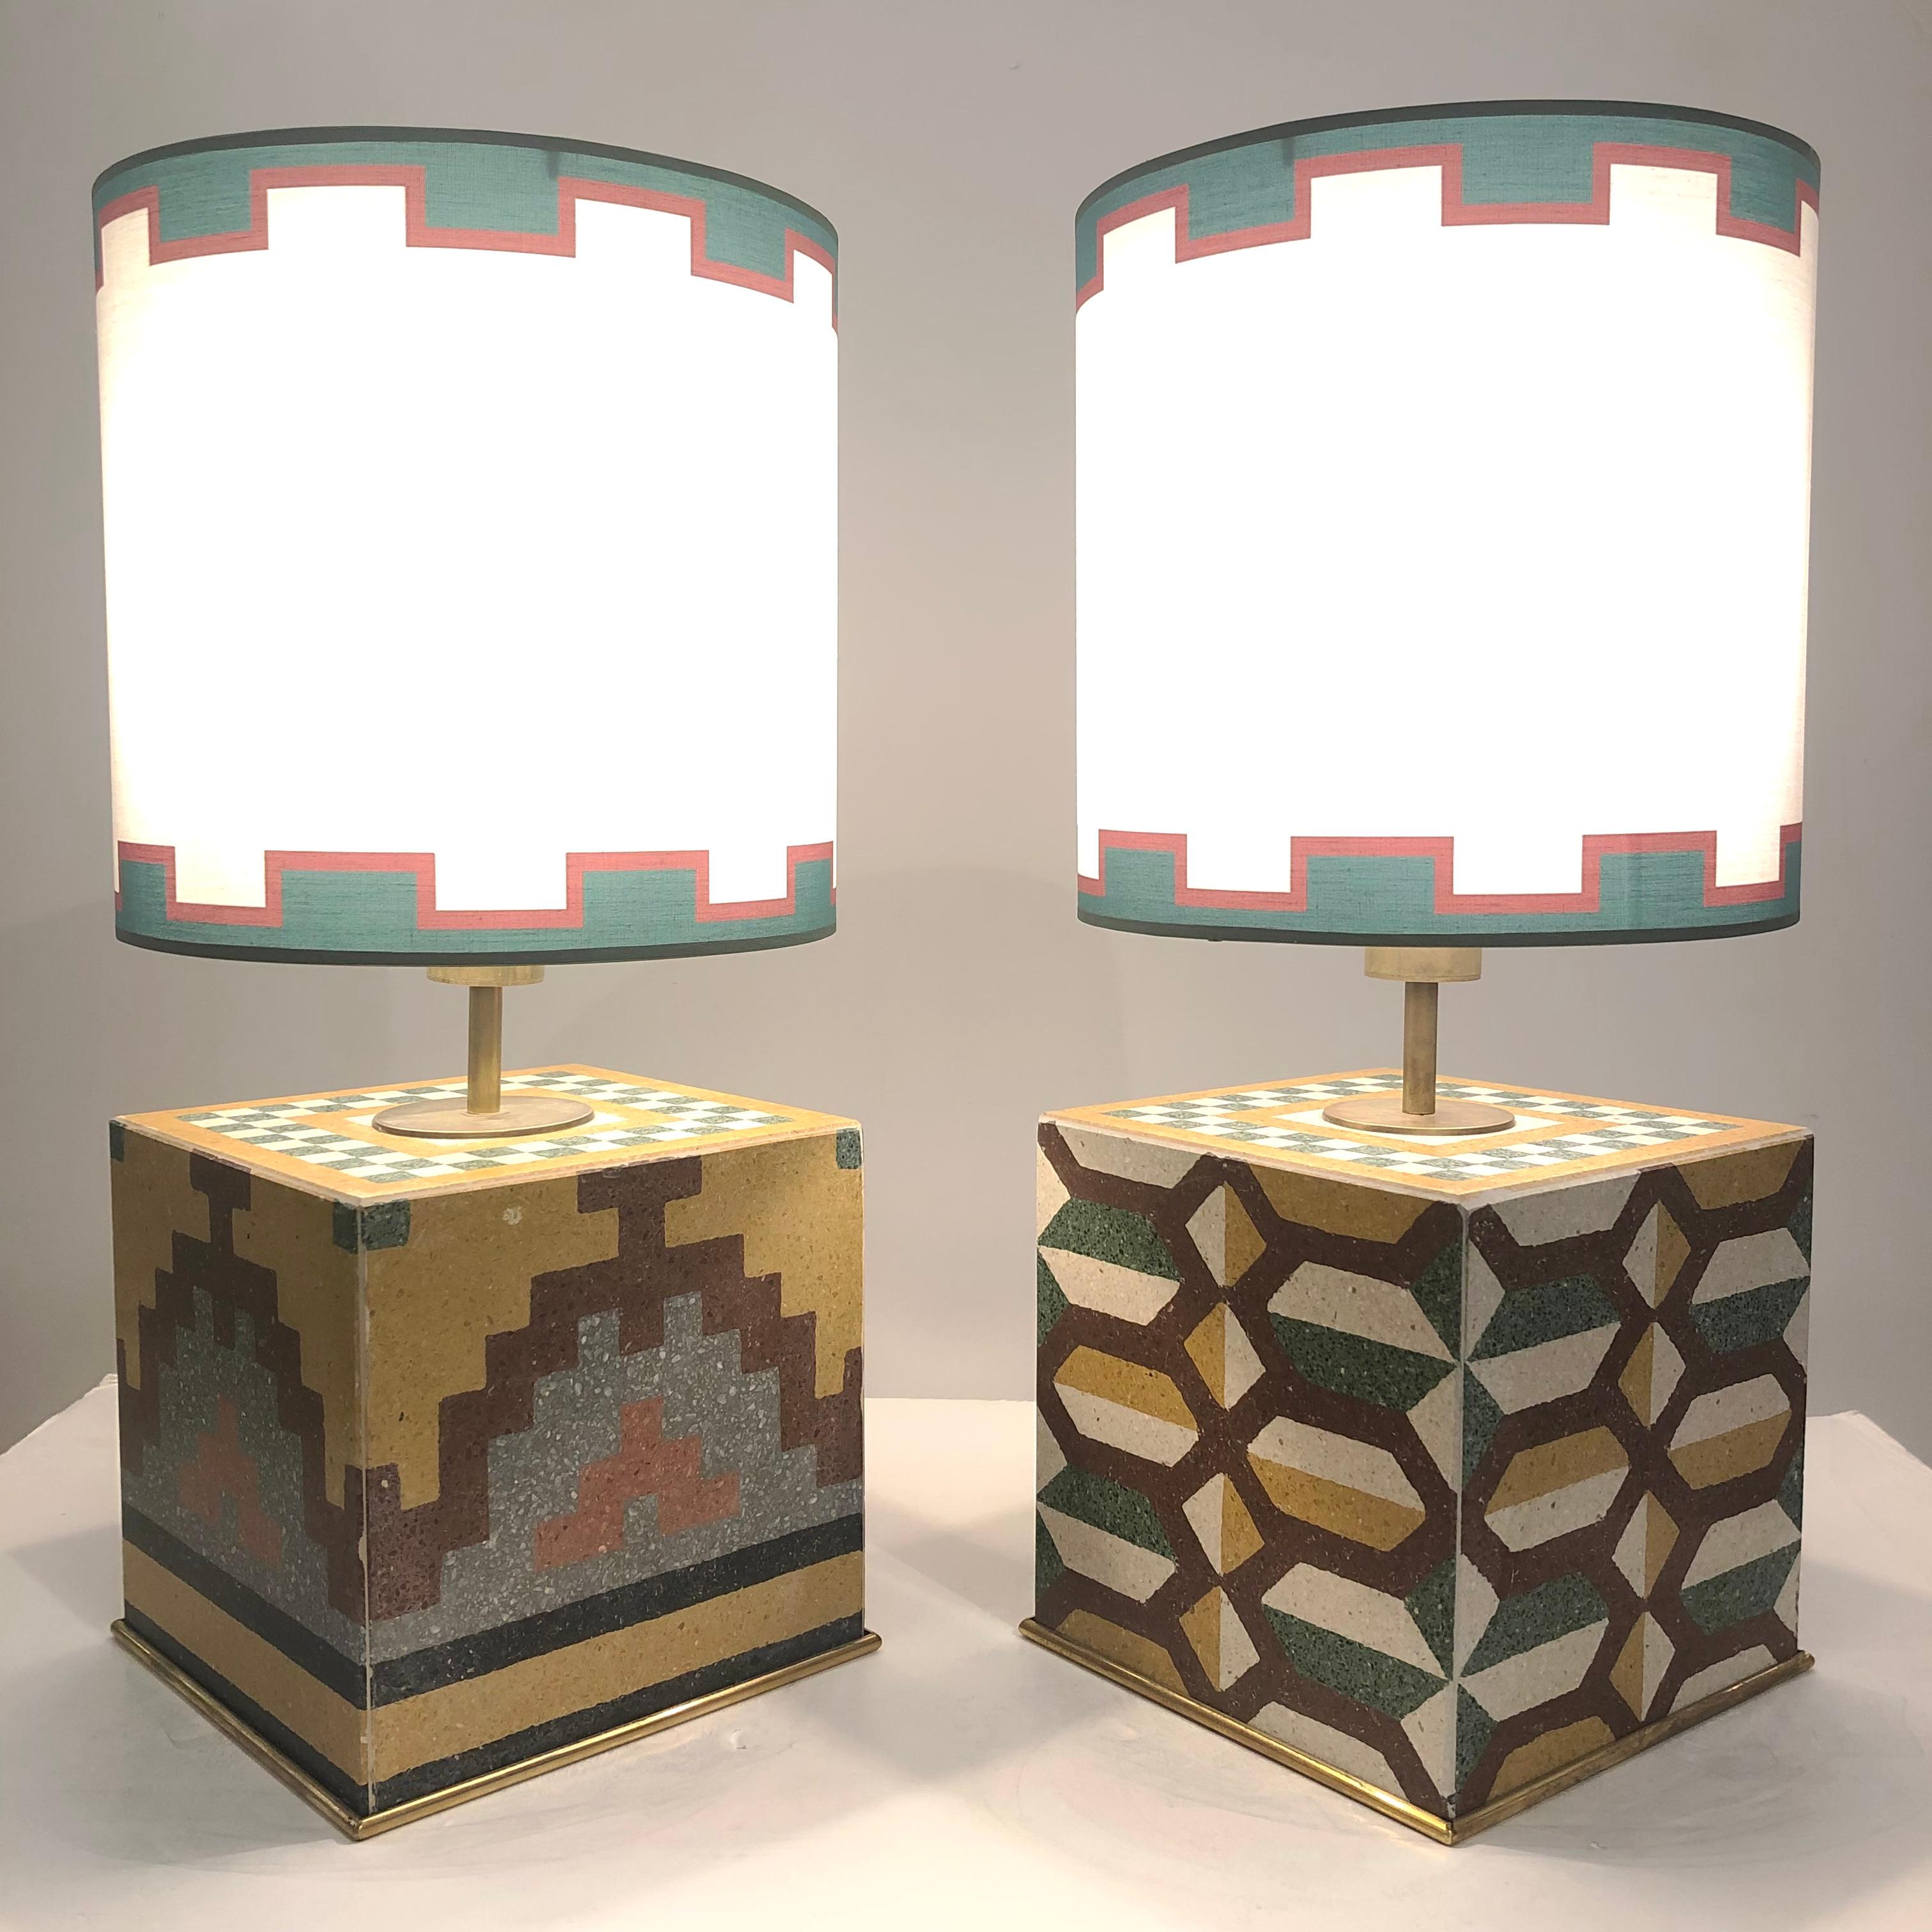 An Italian artistic modern creation, entirely handcrafted, made out of mid 20th-Century cement tiles, with mosaic hand applied unique decor in yellow, brown, ochre, green tints. The ivory shades are customized with a greek border in terracotta brown